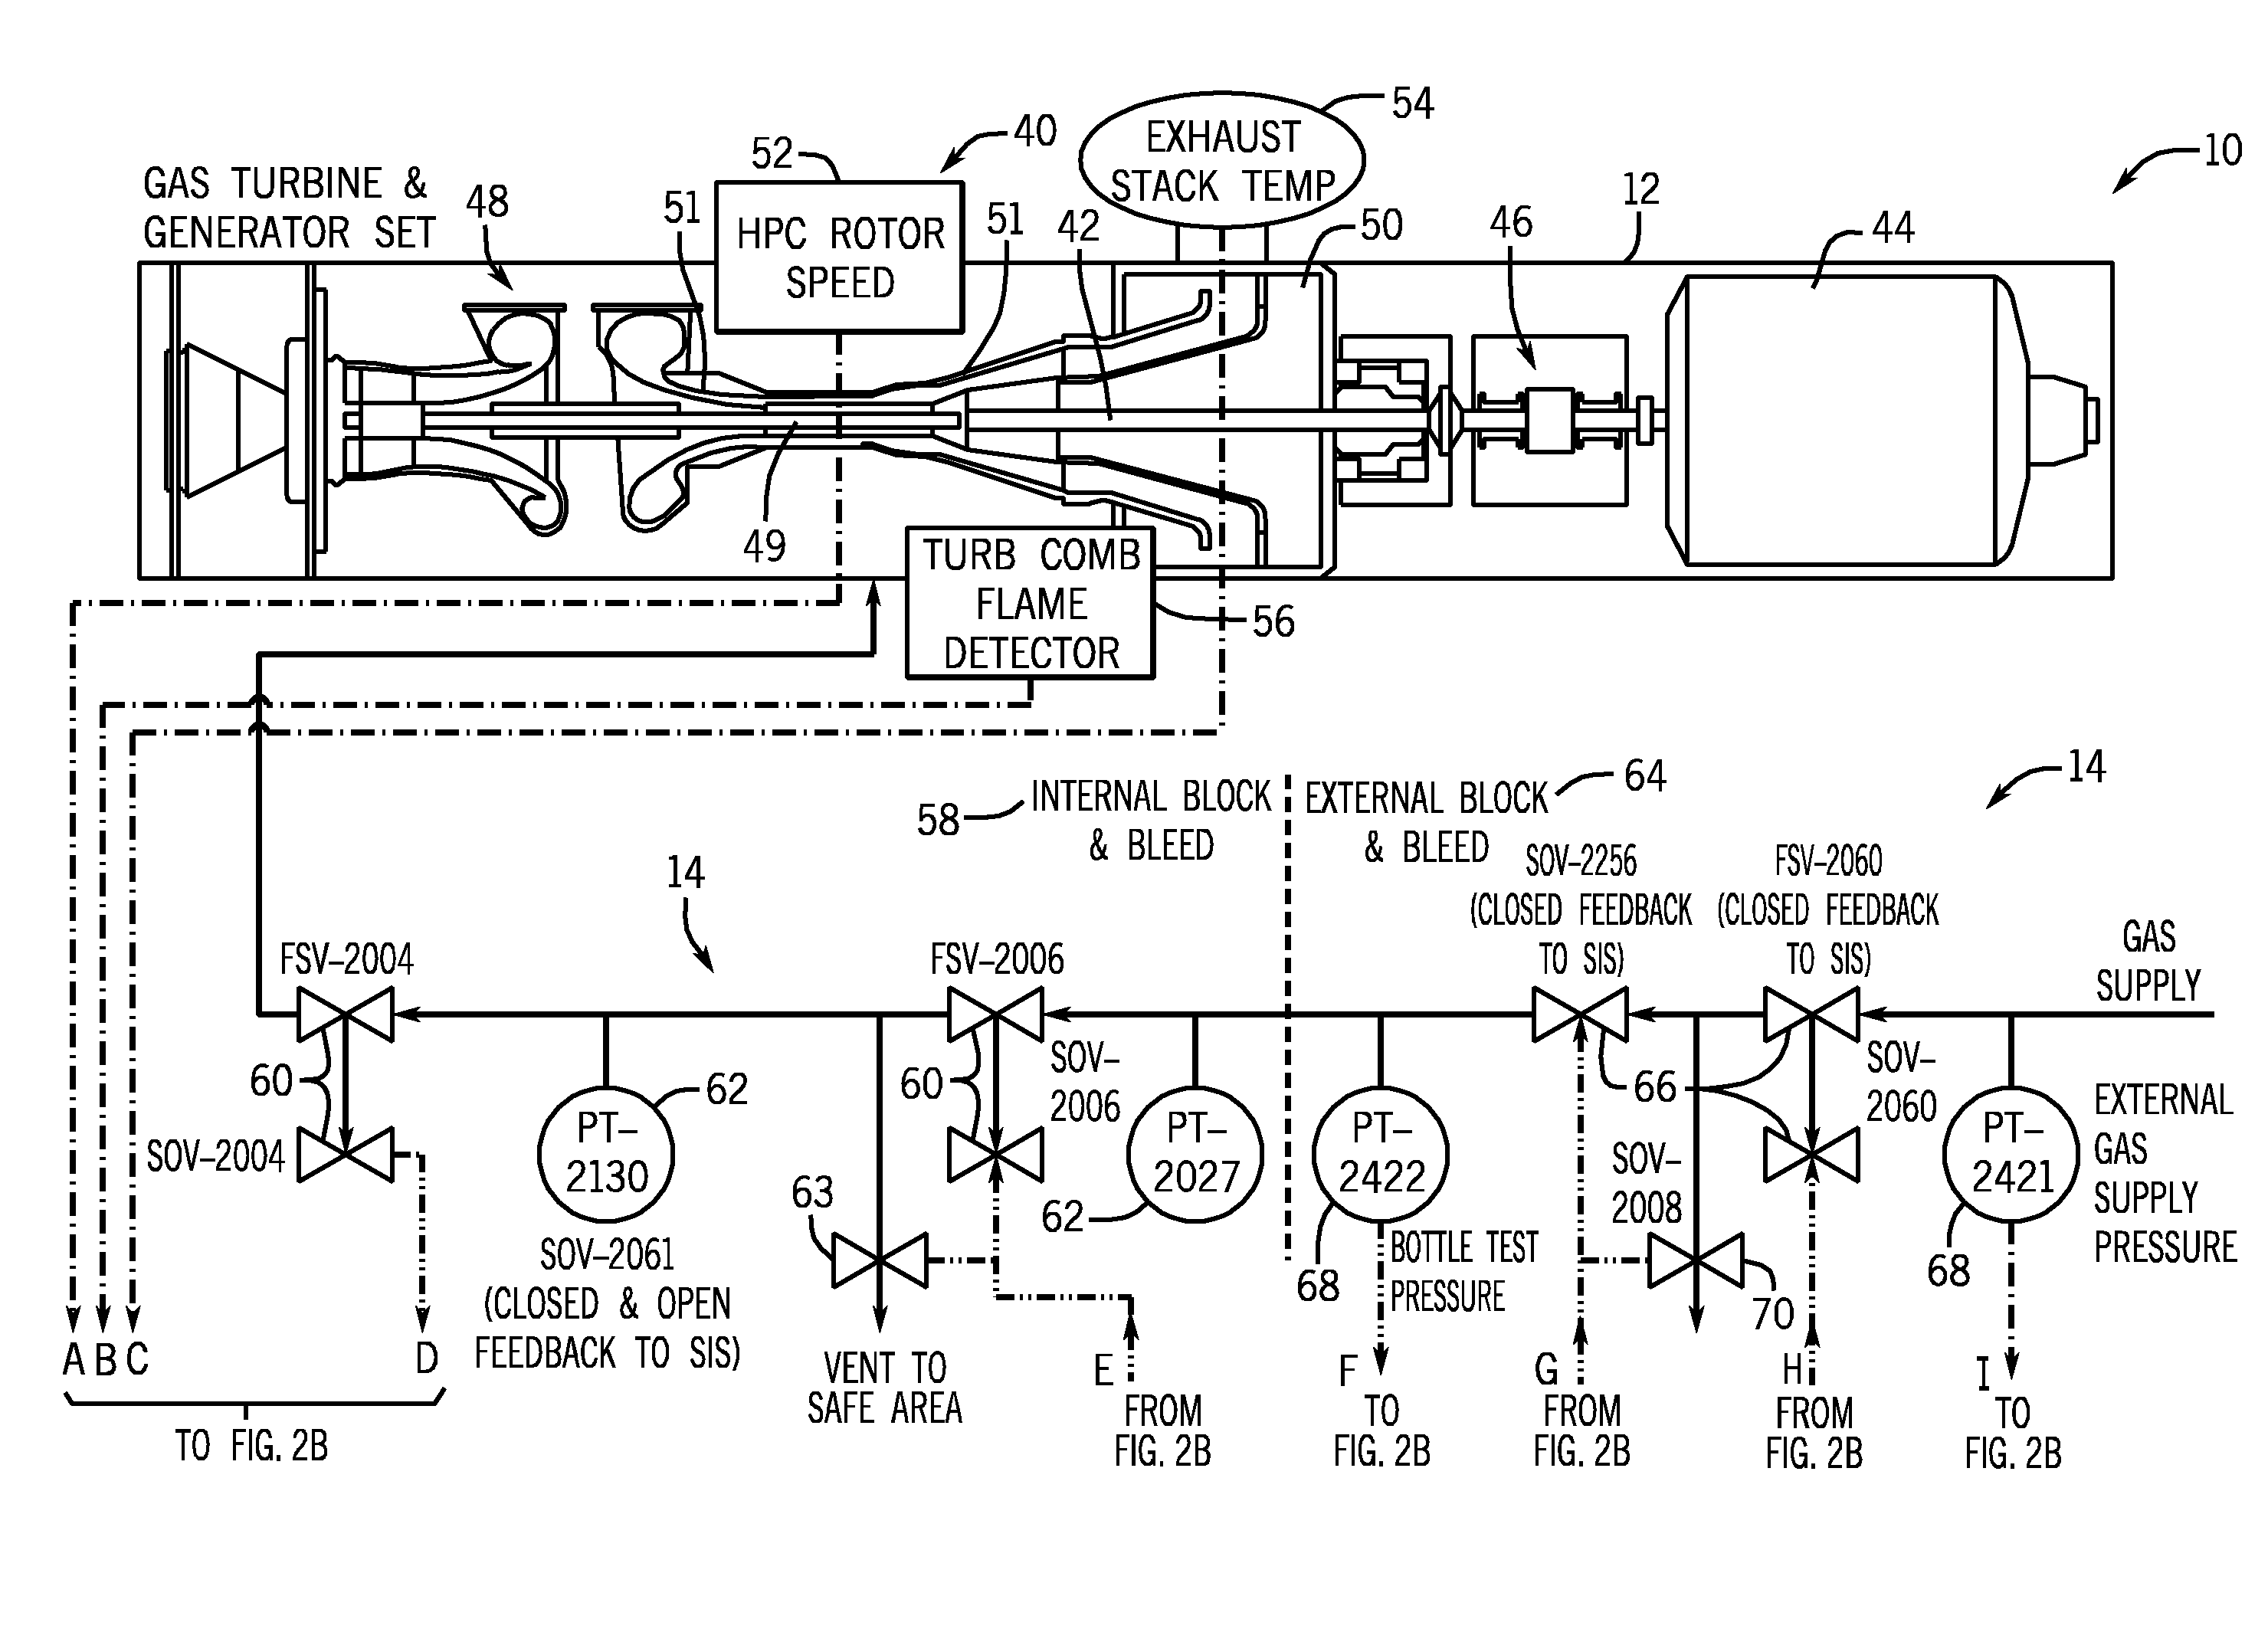 Safety instrumented system (SIS) for a turbine system